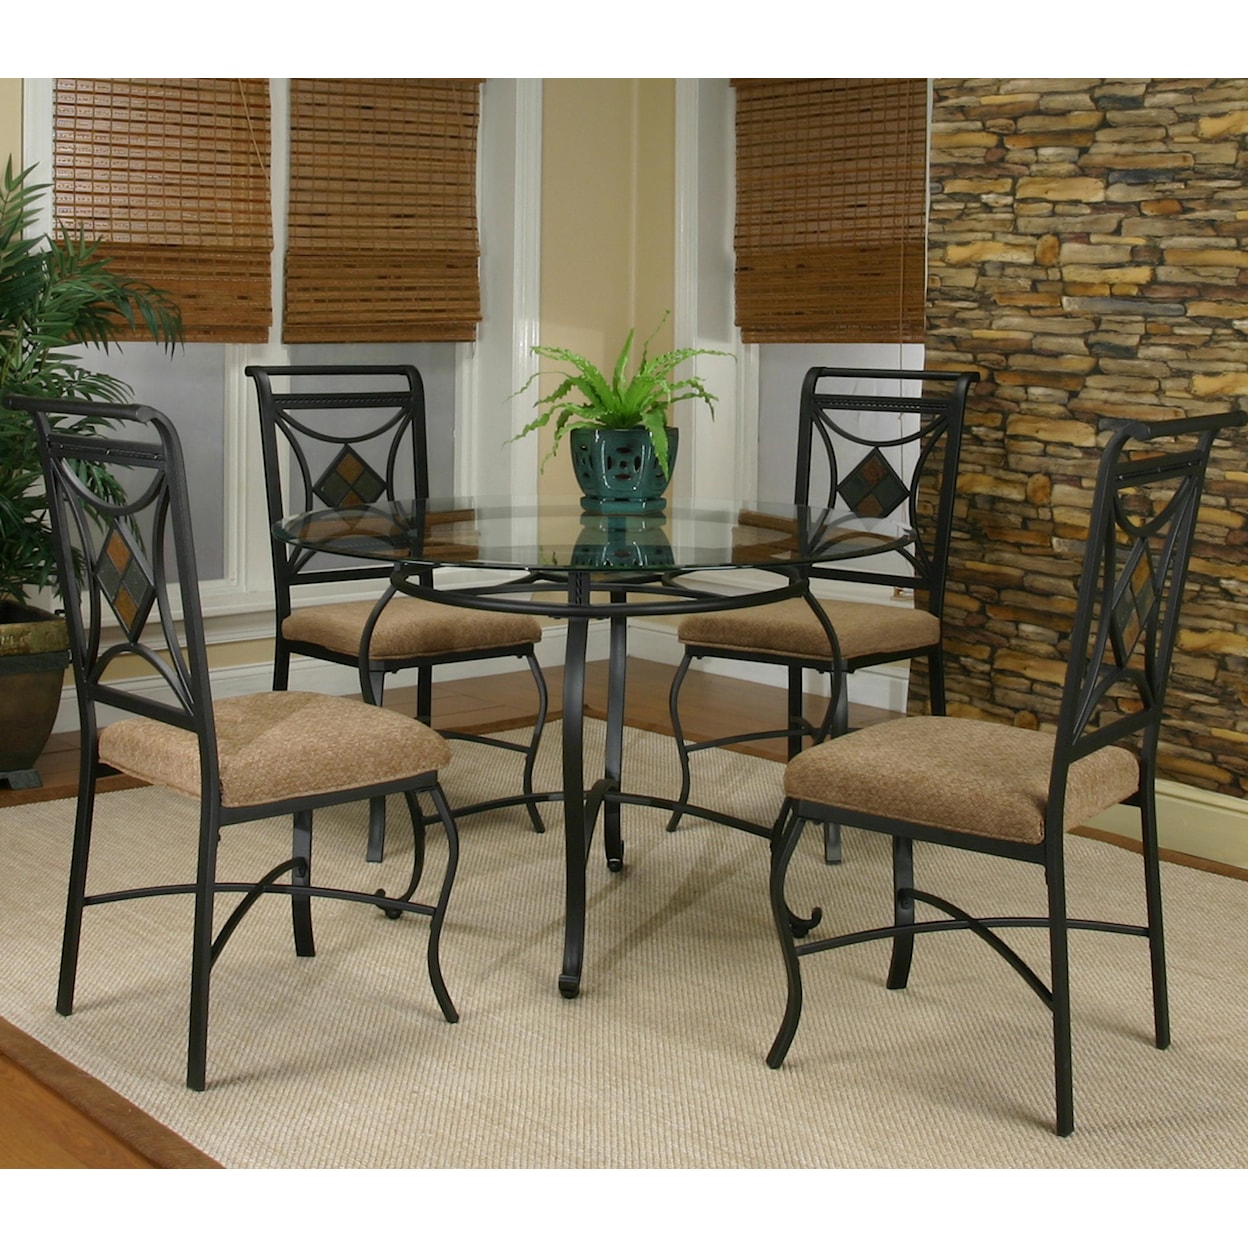 Cramco, Inc Cramco Trading Company - Glendale  Table and Chair Set